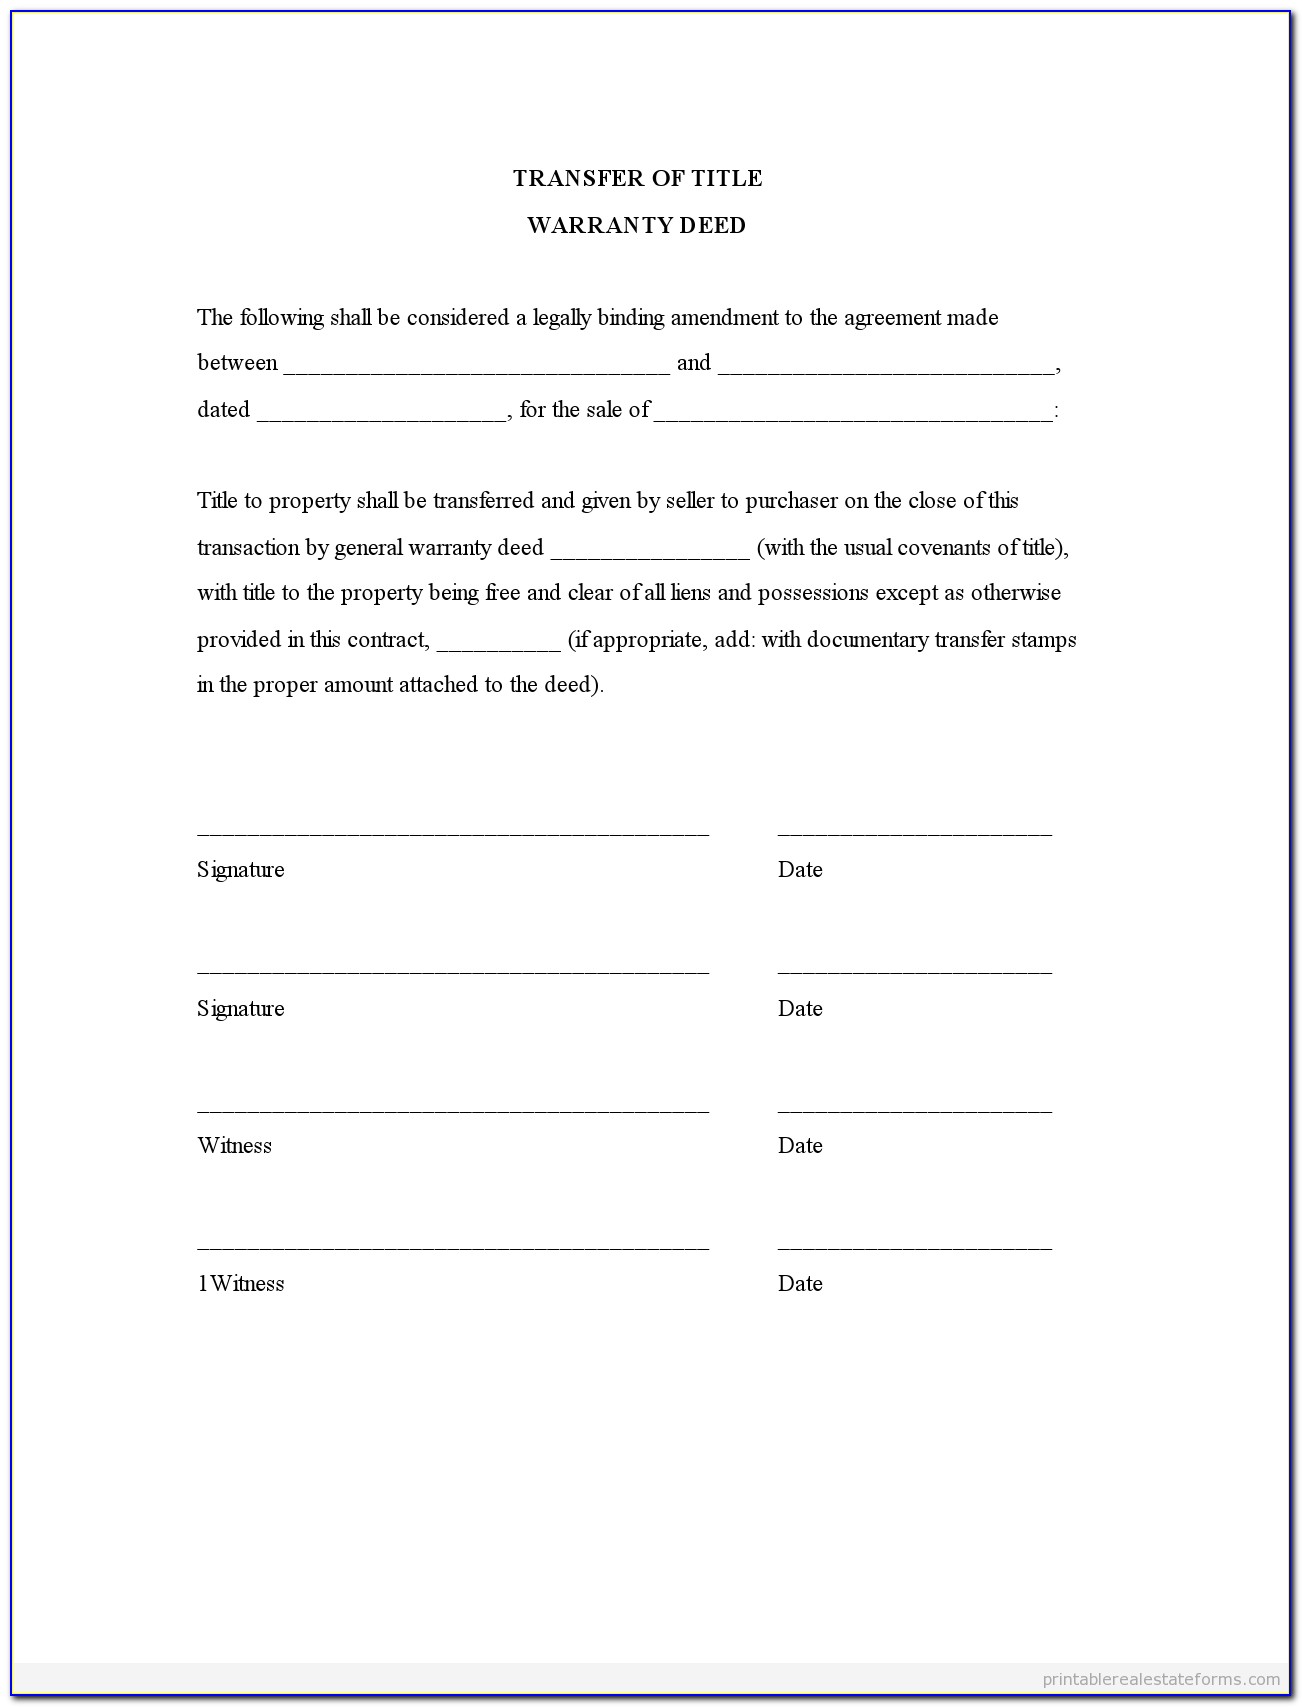 Real Estate Deed Transfer Form Free